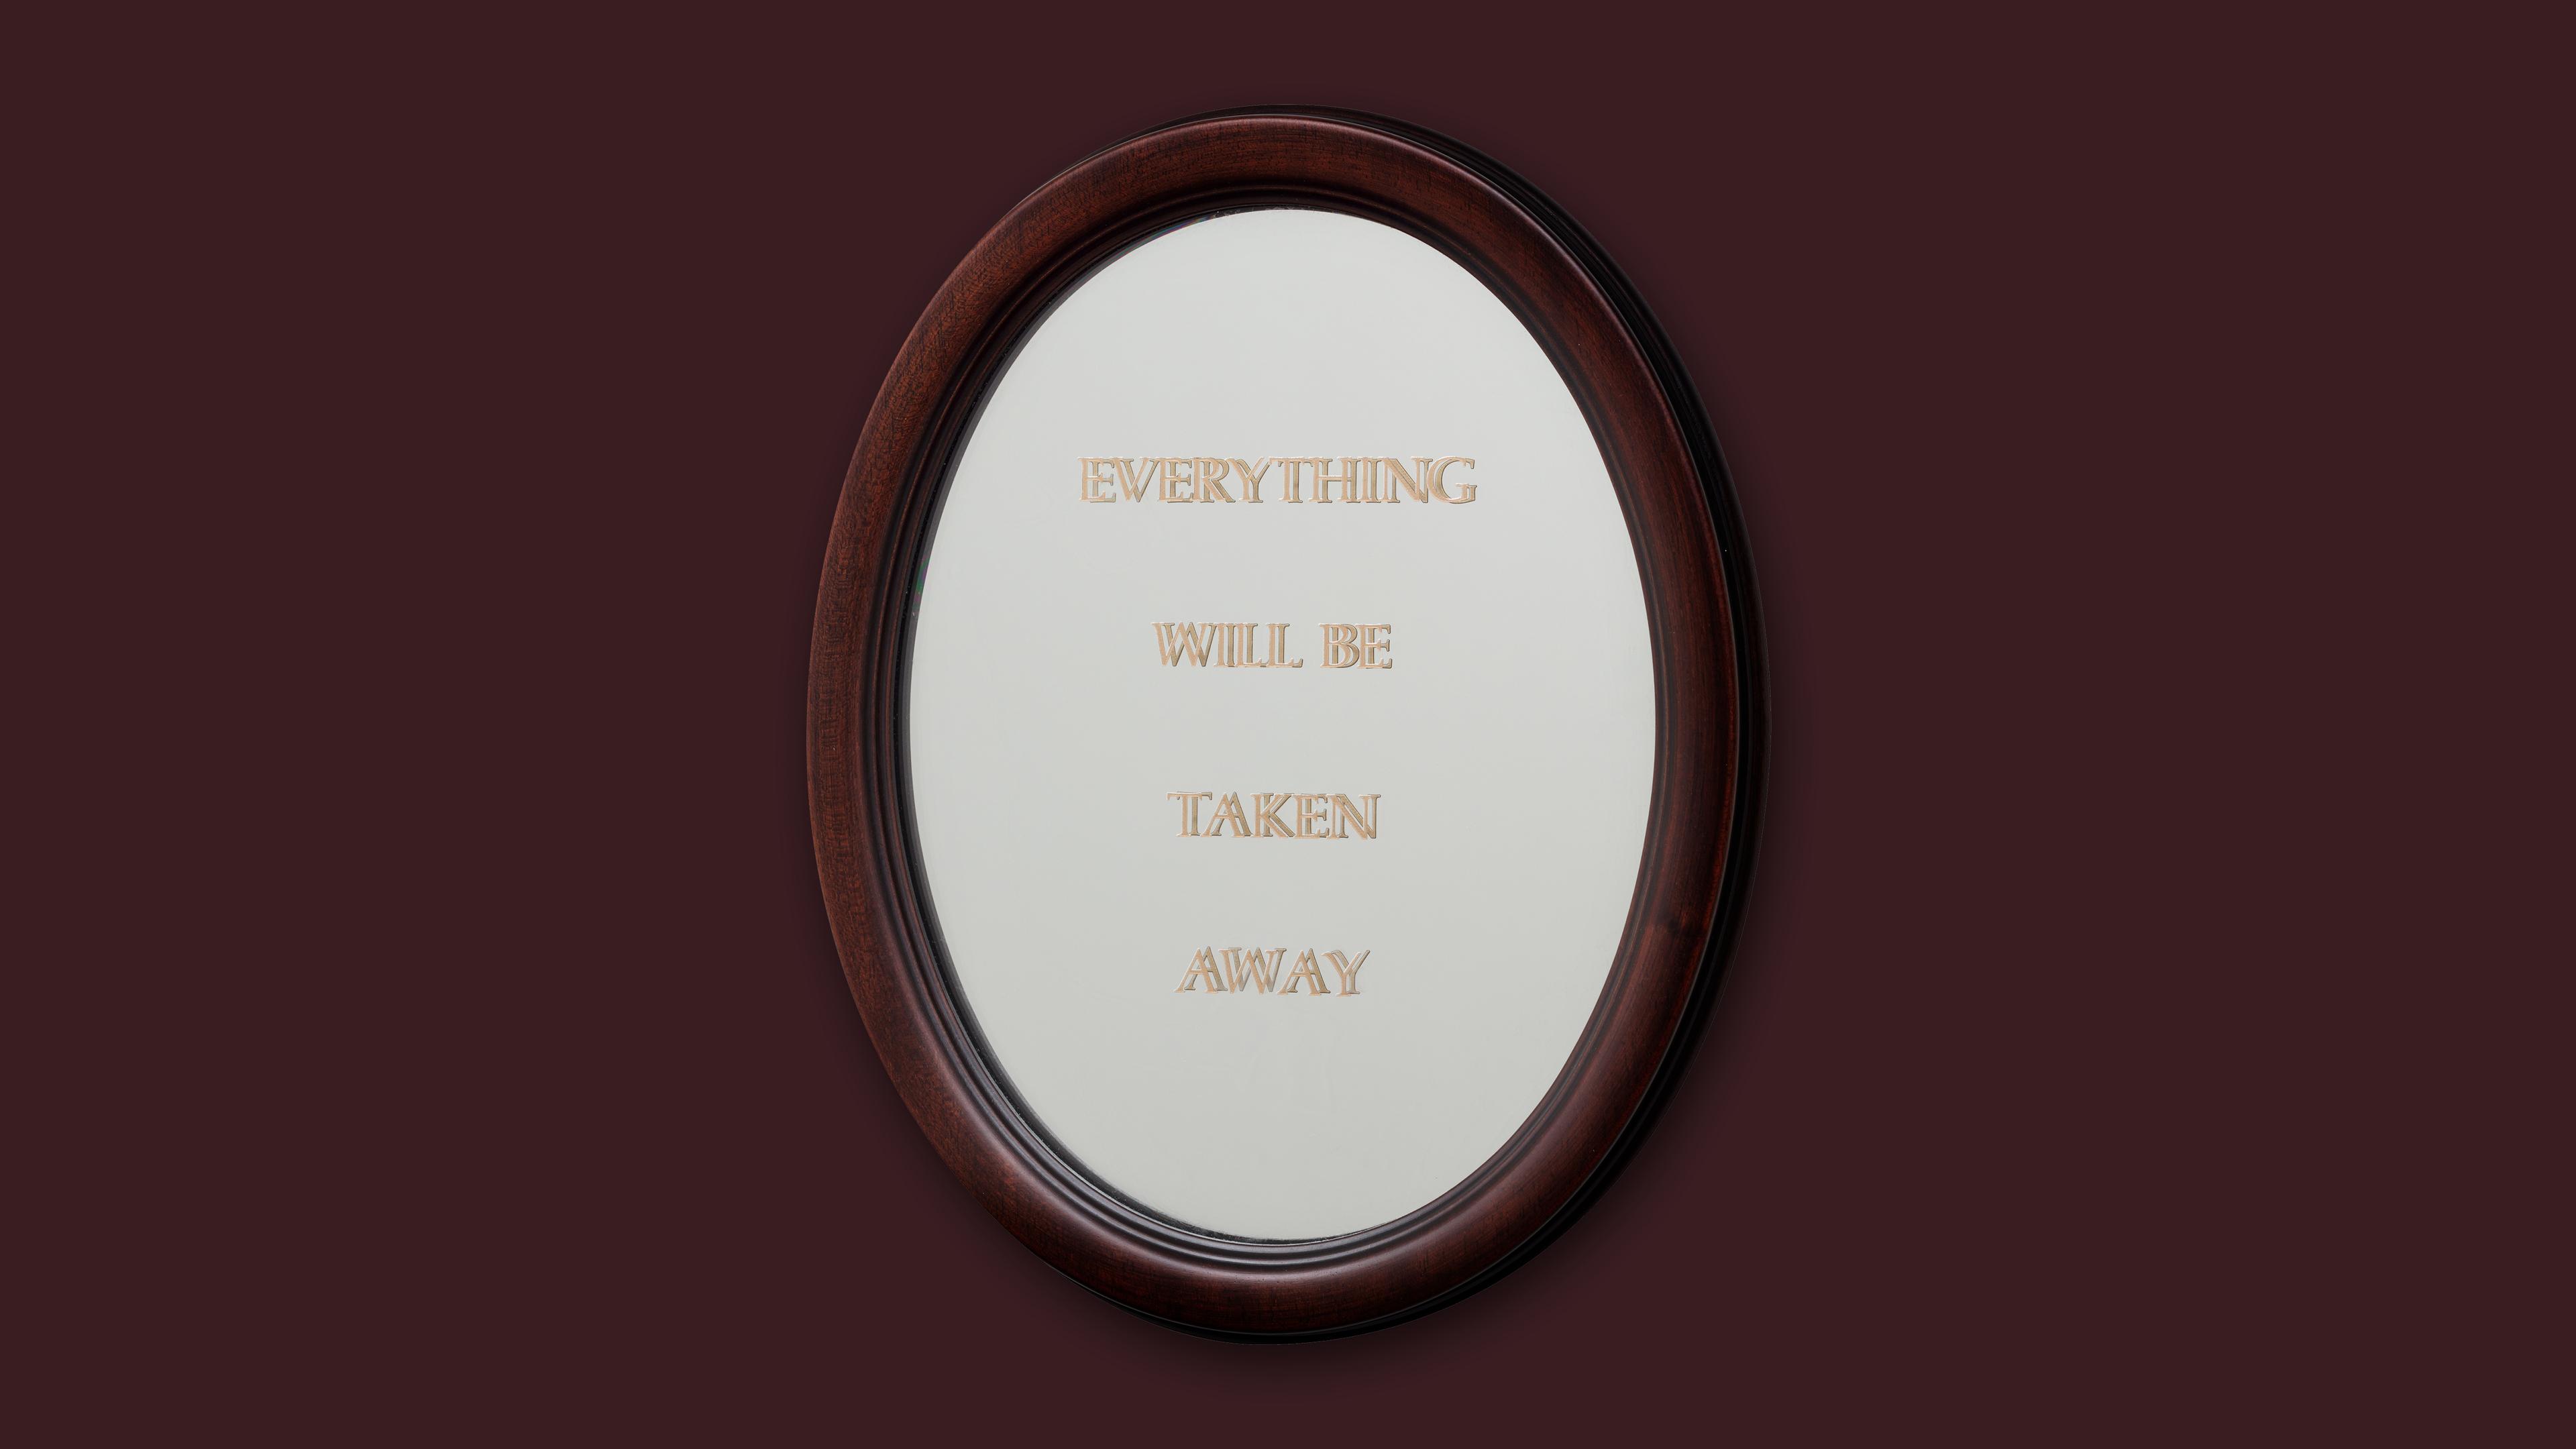 Brown backdrop with an oval mirror in the center that reads " Everything Will Be Taken Away" in capital letters. 